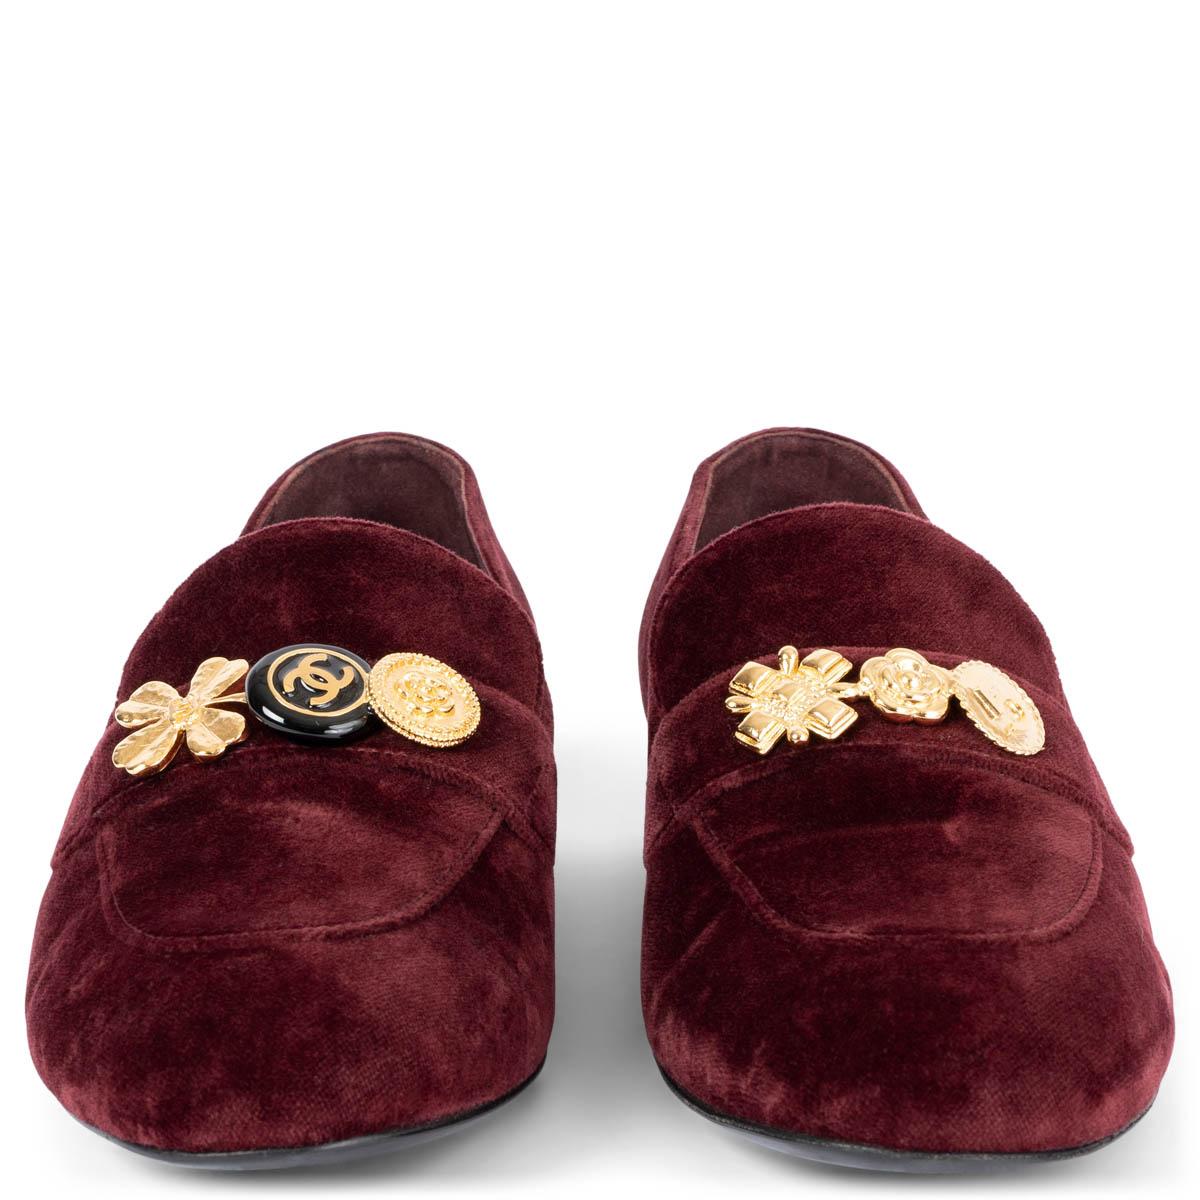 100% authentic Chanel lucky charm loafers in burgundy velvet embellished with Chanel's emblems in gold-tone metal. Have been worn once or twice and are in excellent condition. 

2019 Pre-Fall

Measurements
Model	19B G35182
Imprinted Size	39 (run 1/2